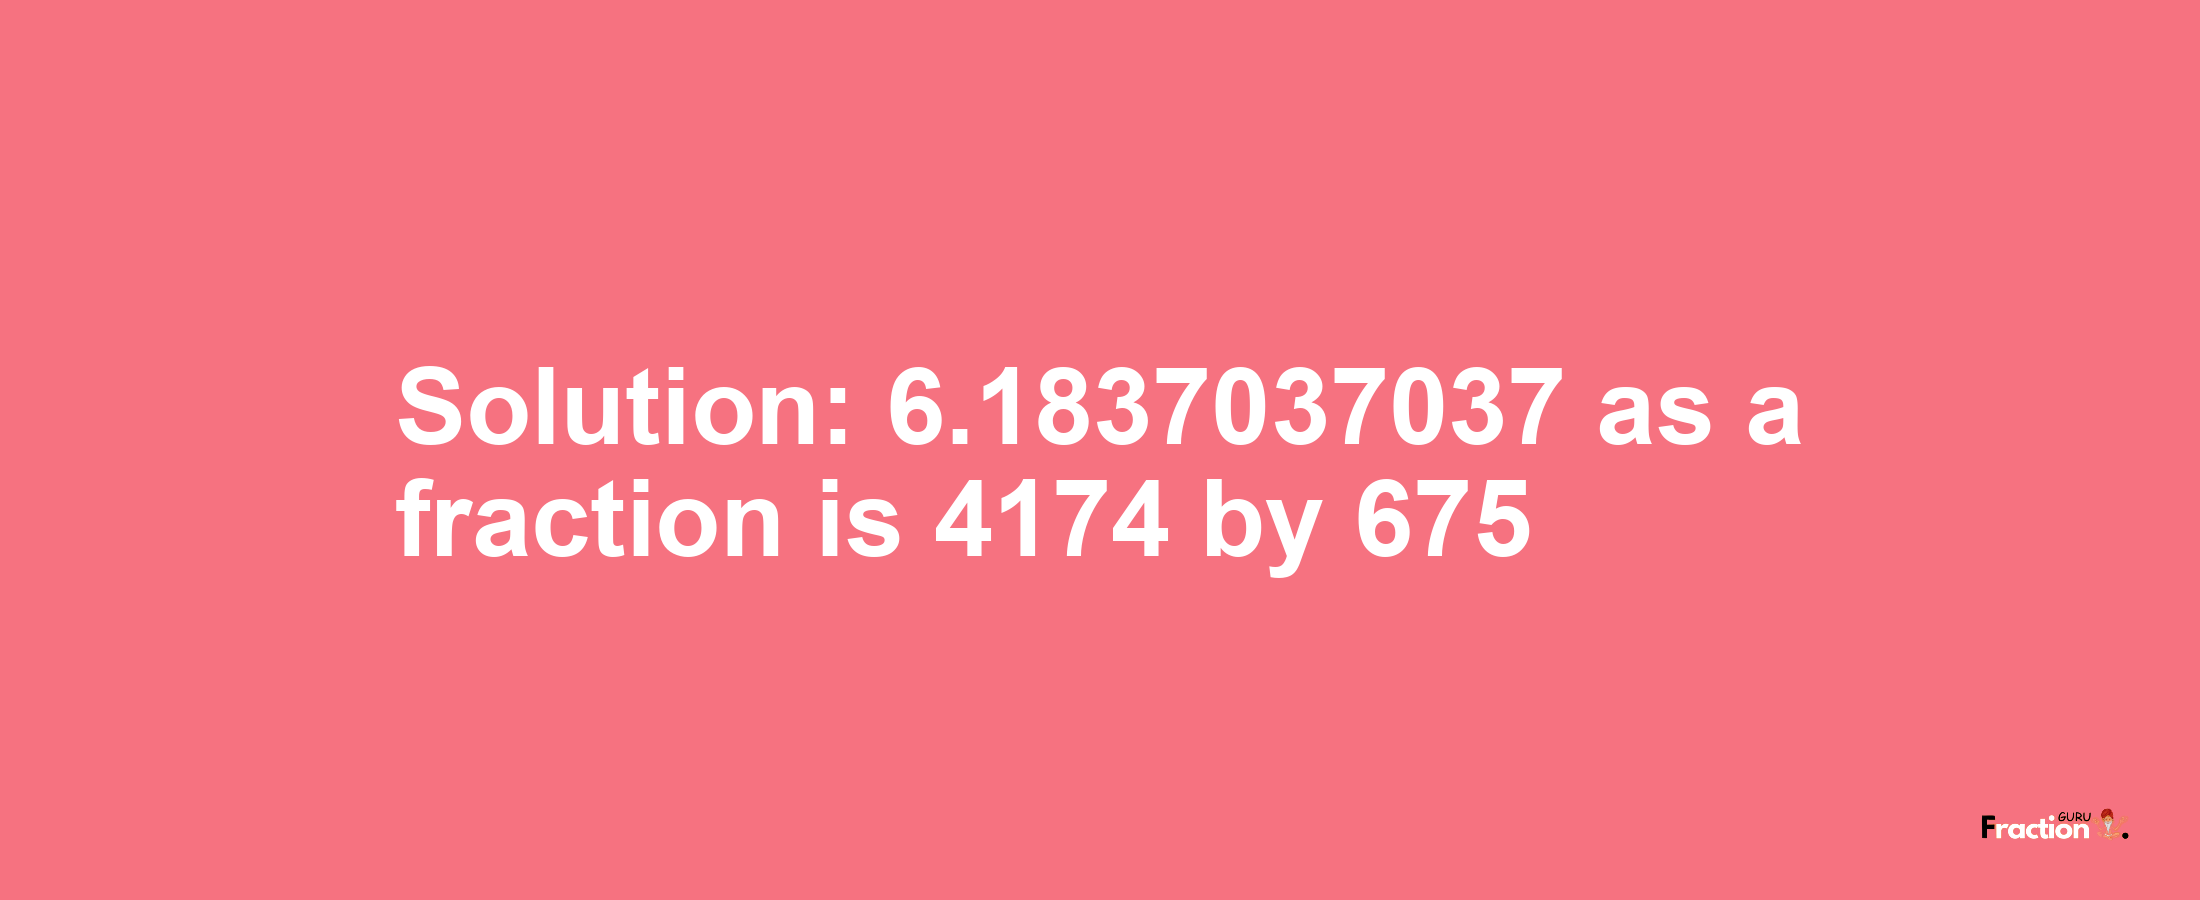 Solution:6.1837037037 as a fraction is 4174/675